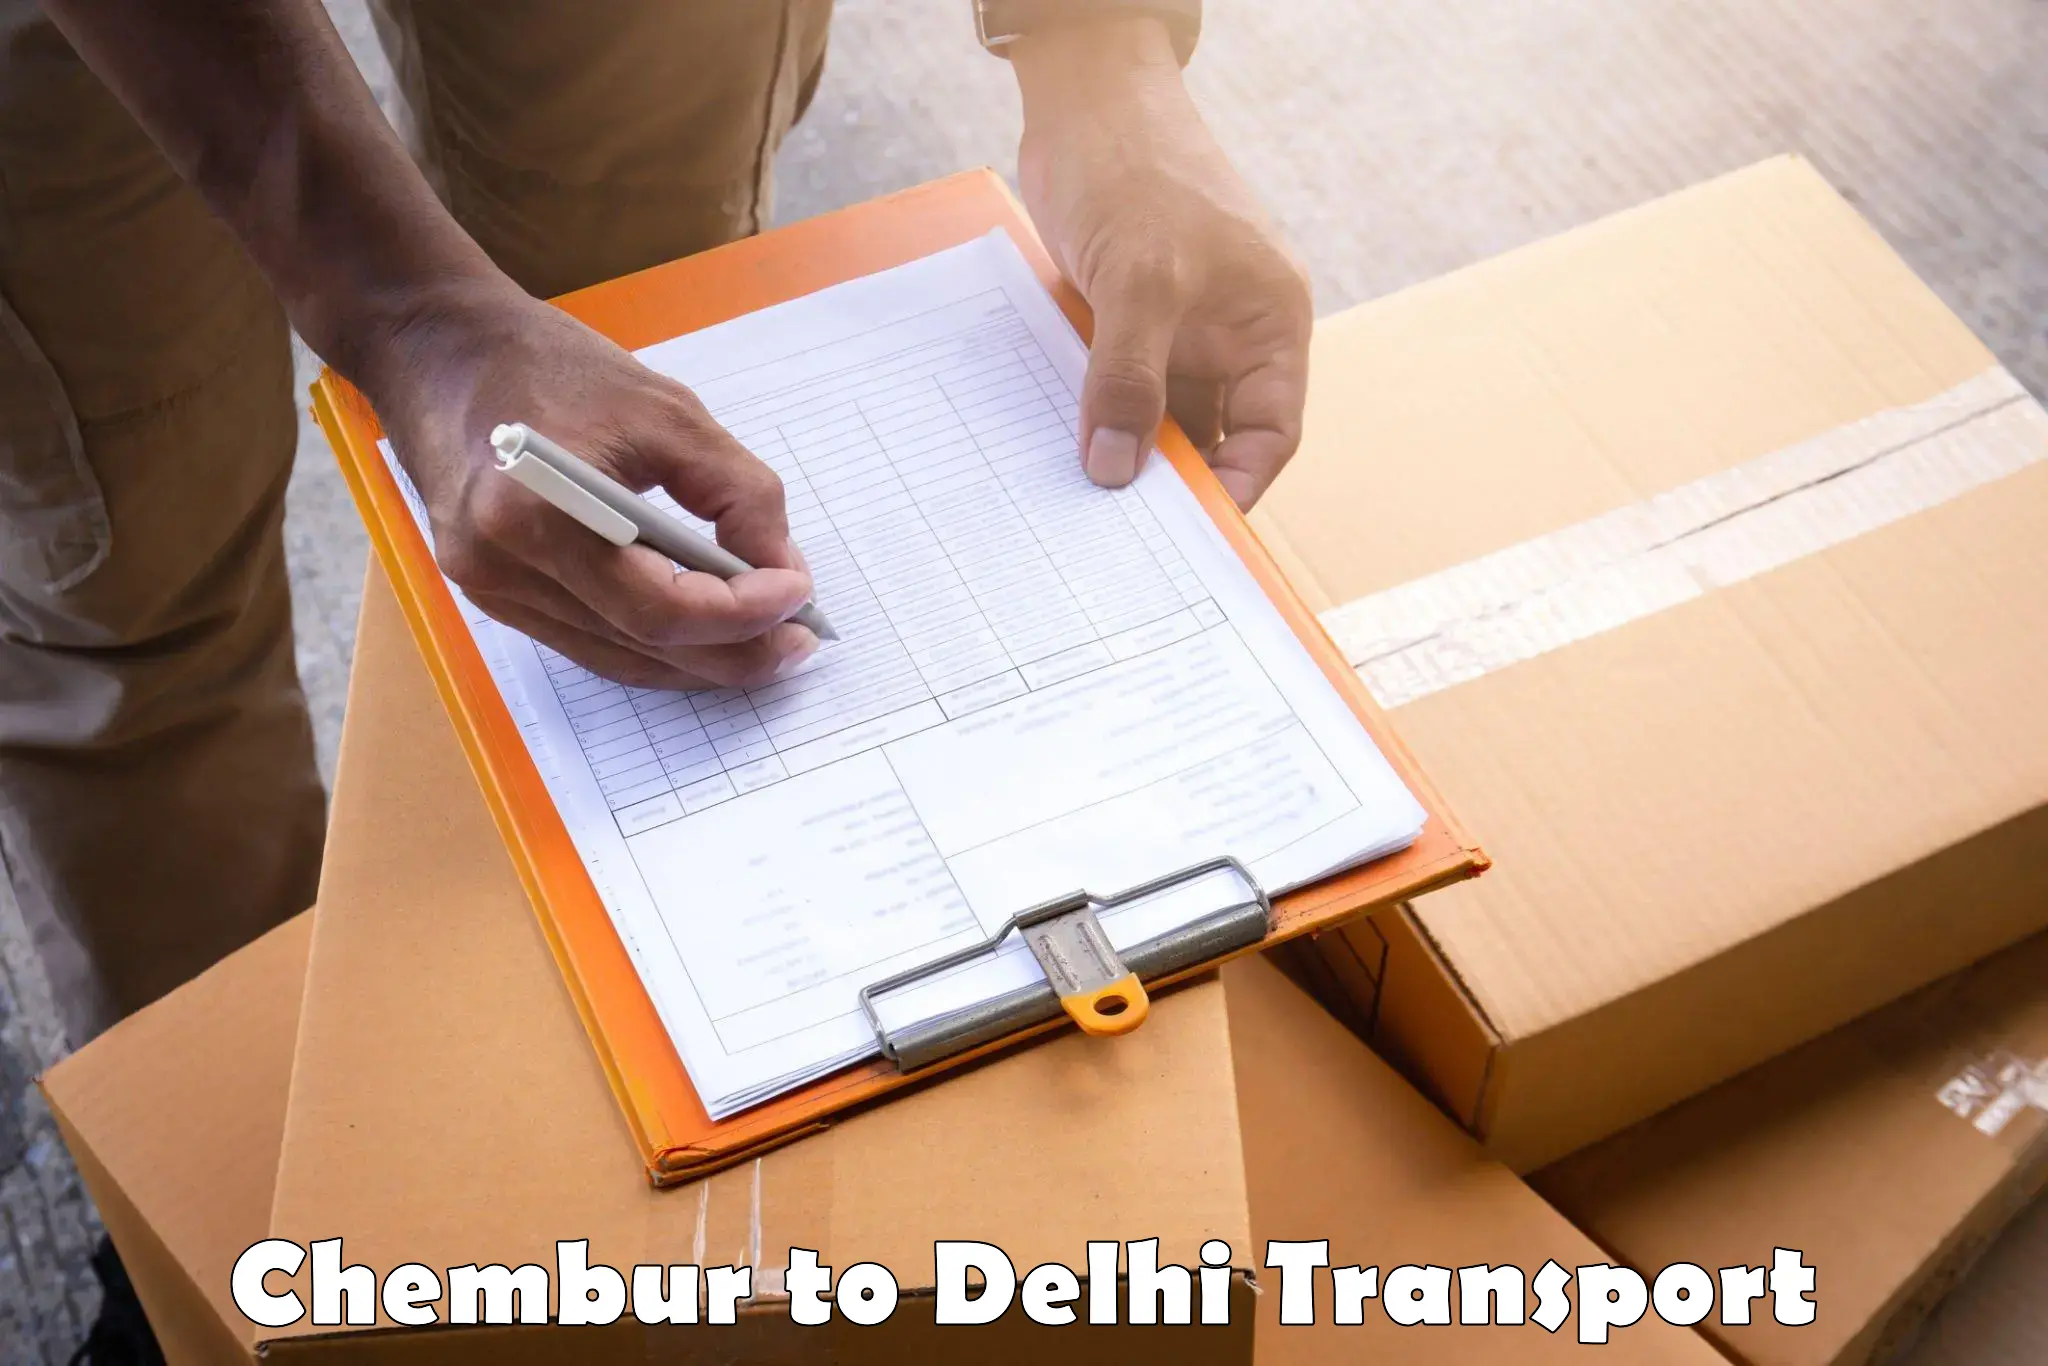 Daily parcel service transport Chembur to NCR